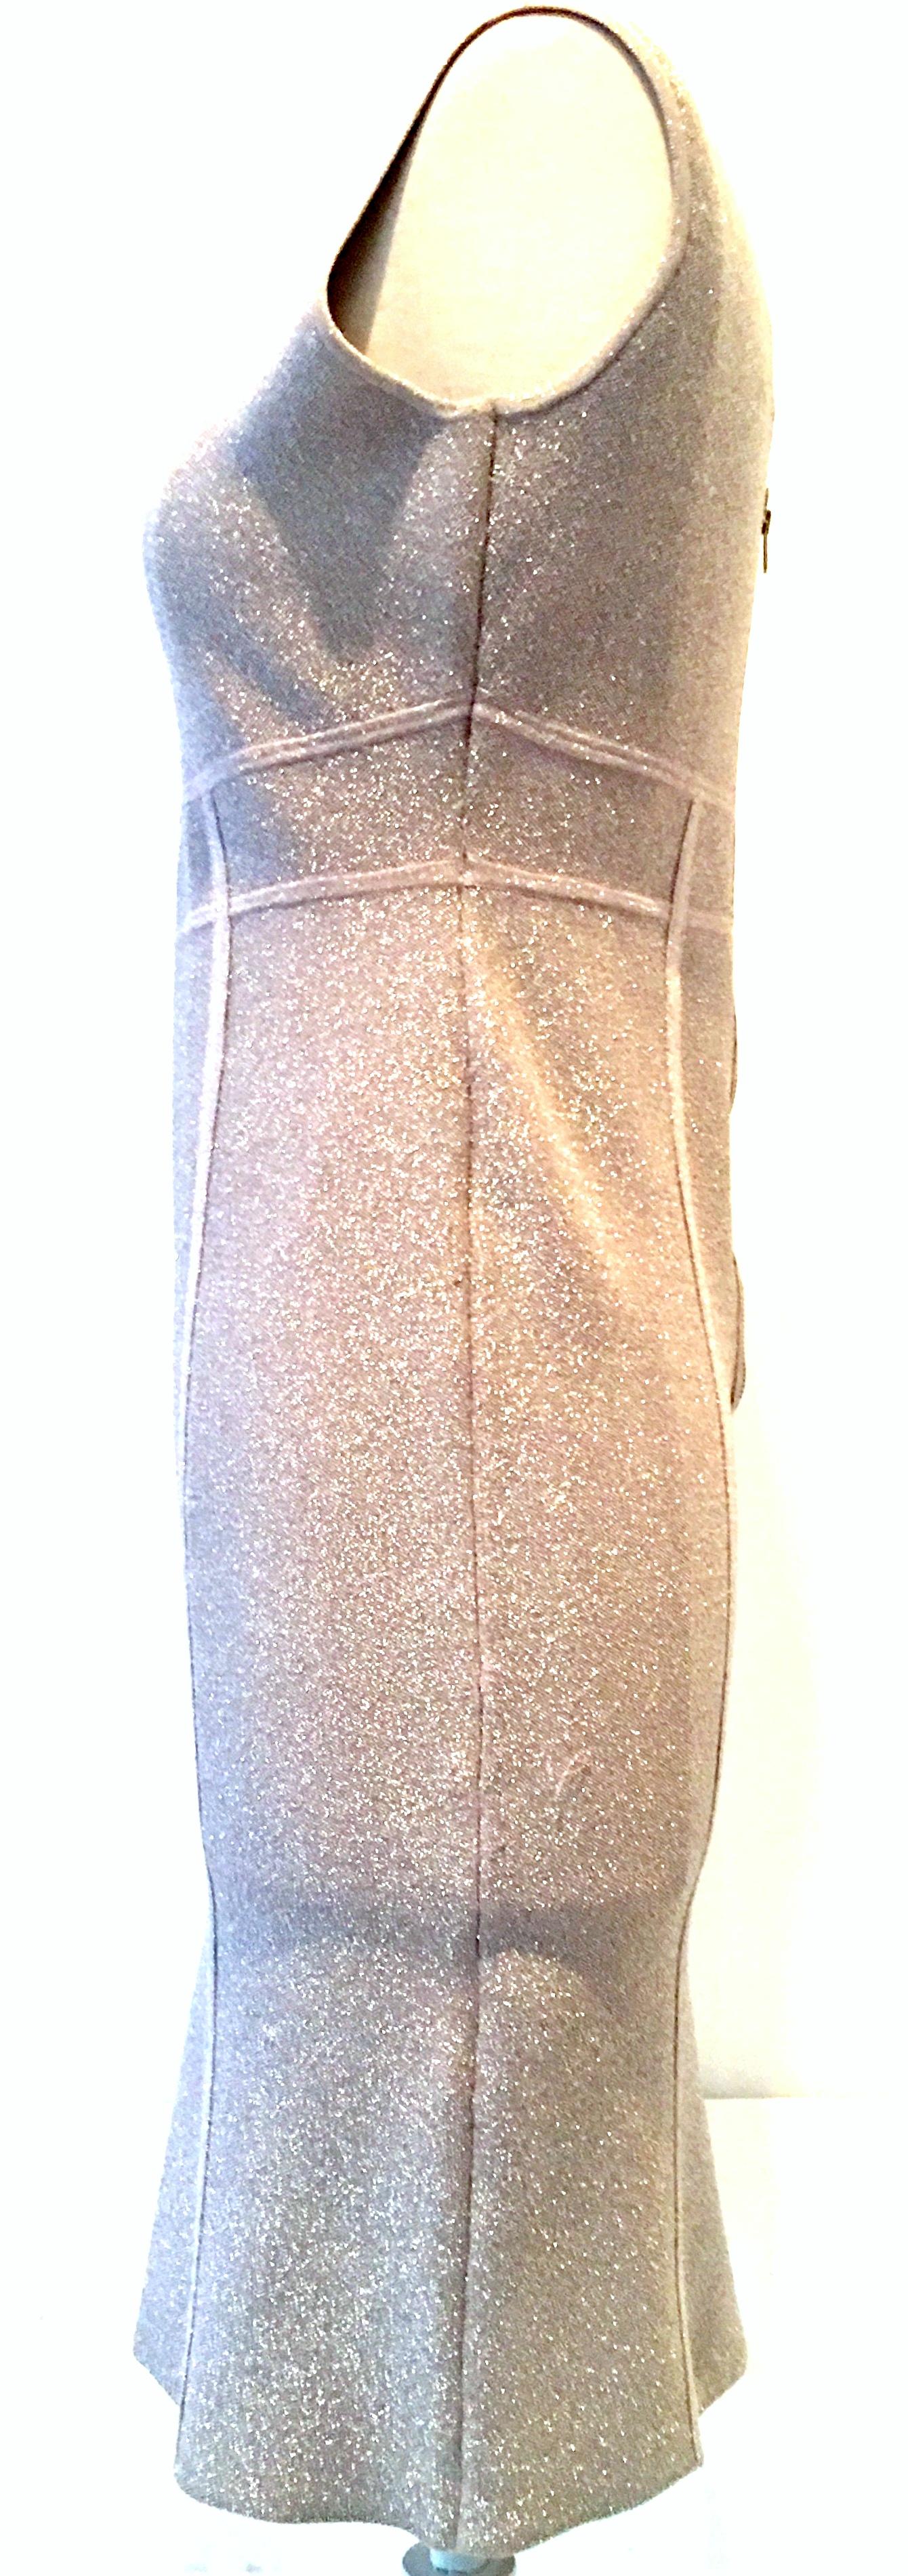 21st Century  & New Herve Leger Style Rose Mist Metallic Cocktail Dress By Maxazria For BCBG Size Medium. Features body contouring fit with exterior applied seam cut outs, exposed back zipper, v deck -t-shirt bodice. This classic, timeless and new